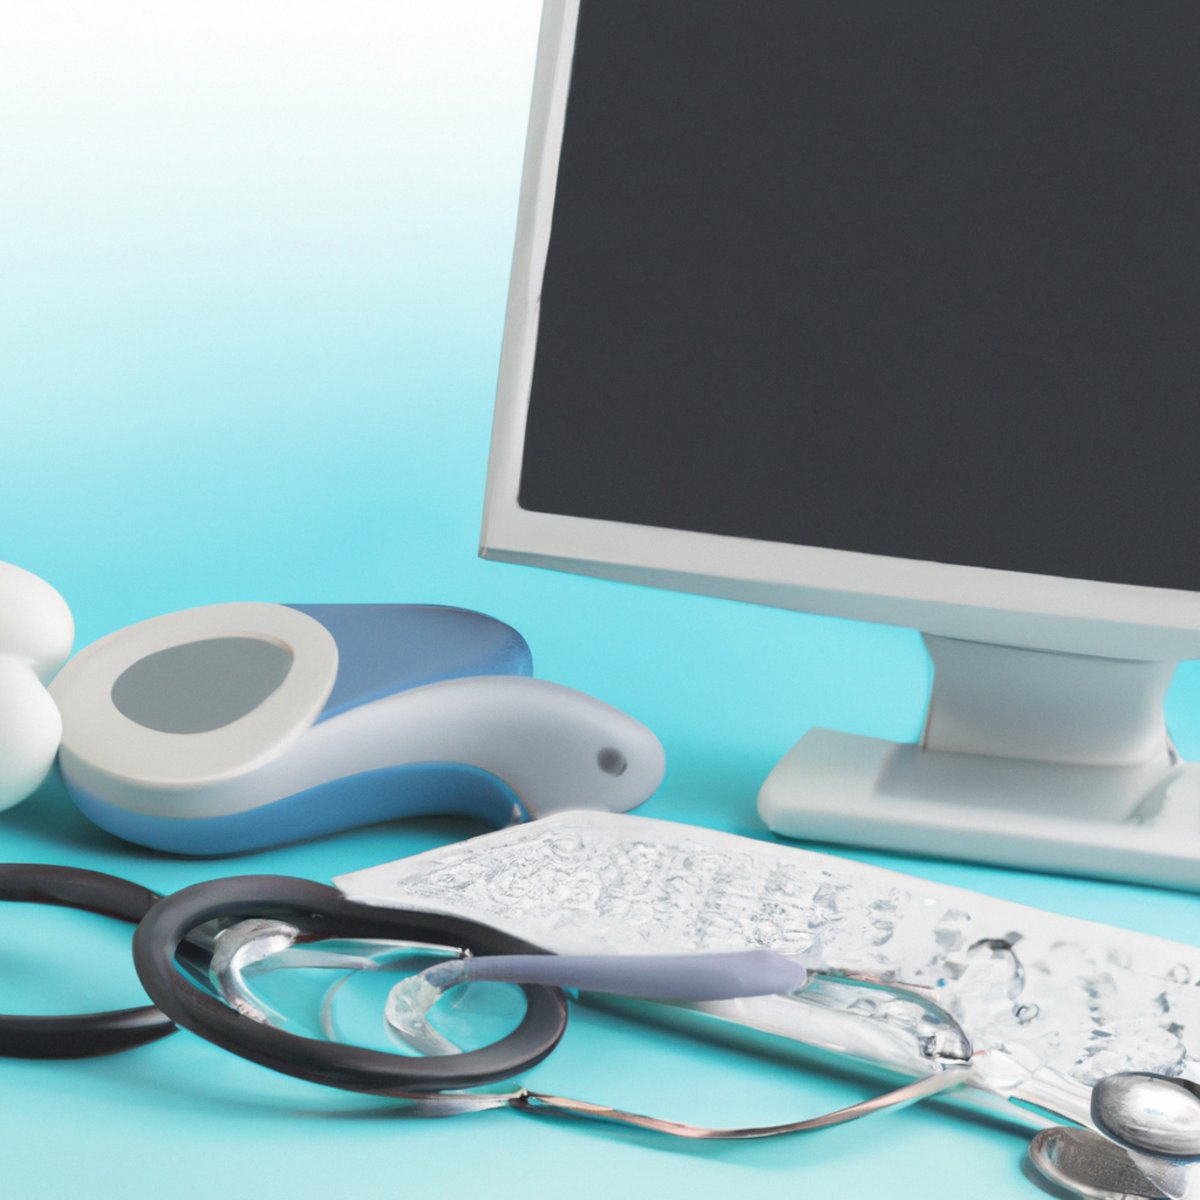 Medical tools and equipment for diagnosing Caroli Disease in Children, including a stethoscope, ultrasound machine, and laboratory test tubes.